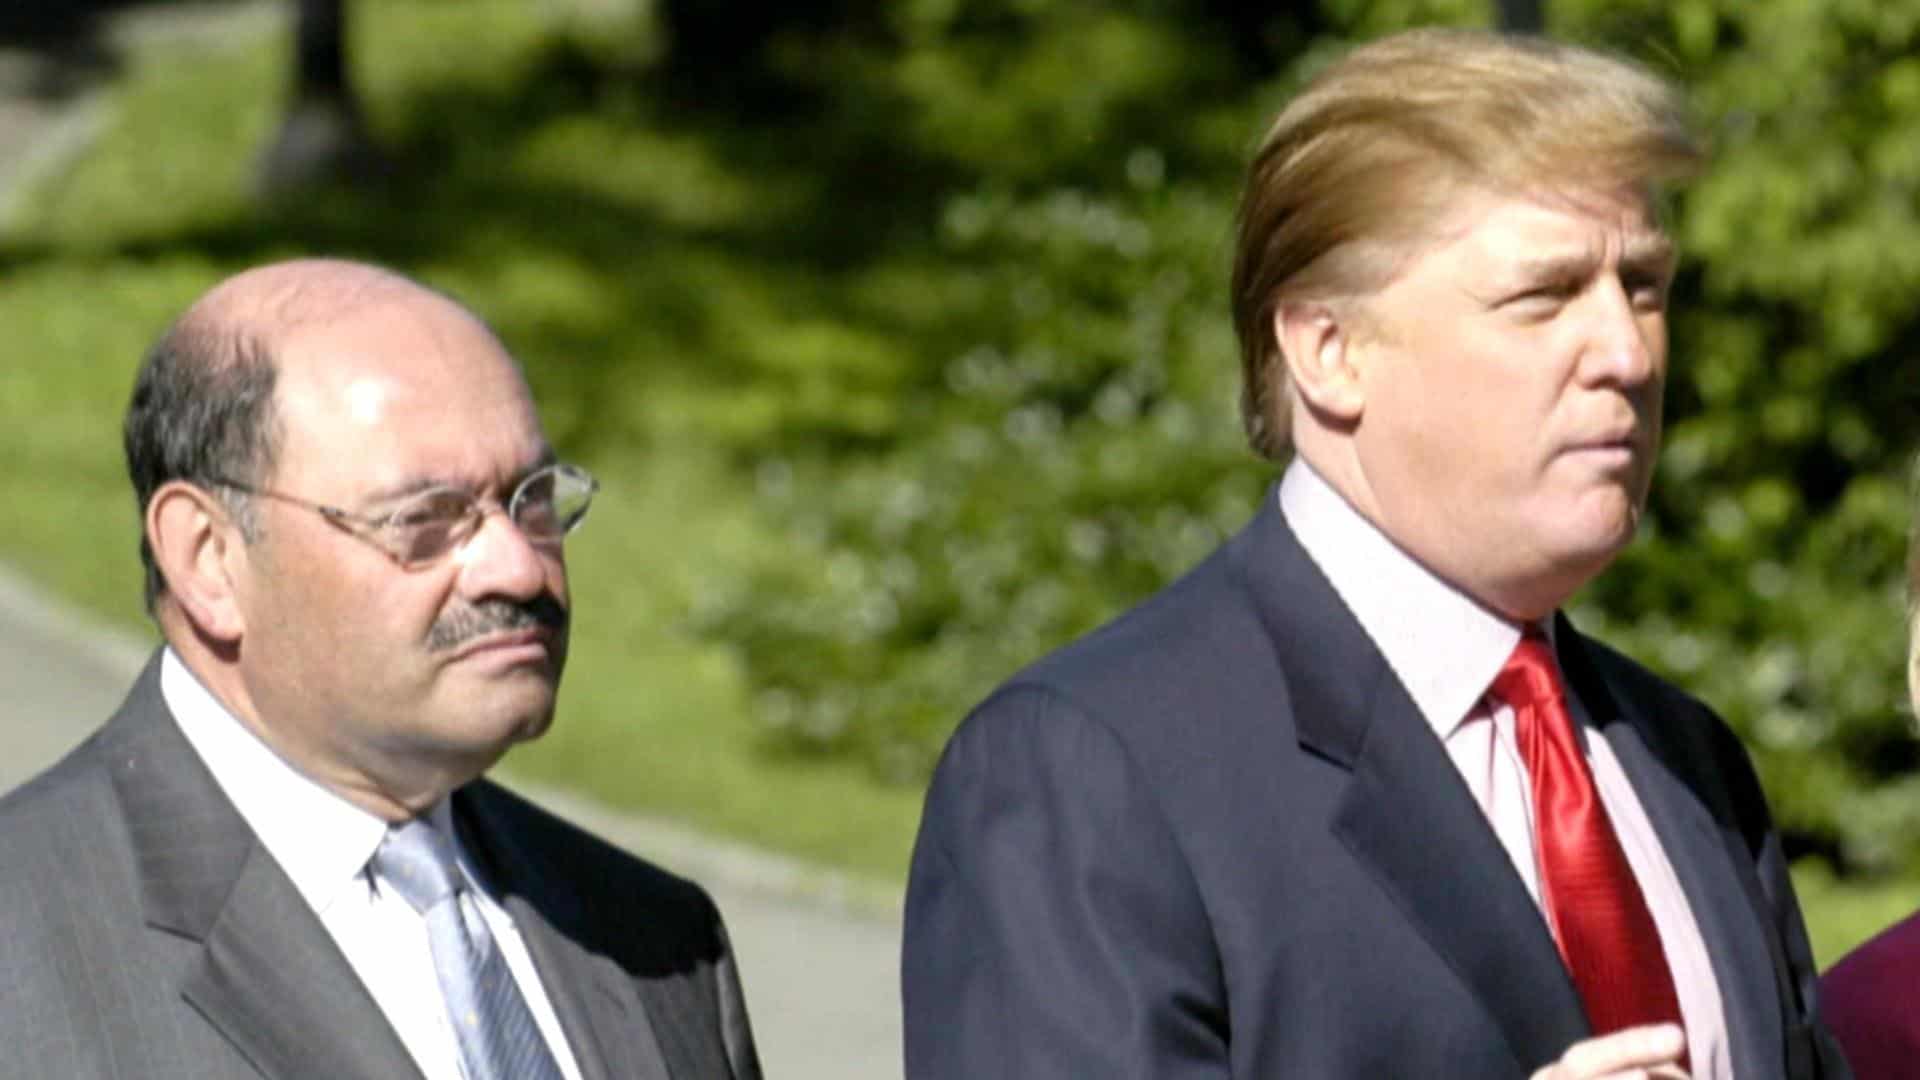 Trump and Two of His Adult Children Had Role in Tax Fraud Scheme: Ex-CFO Testifies